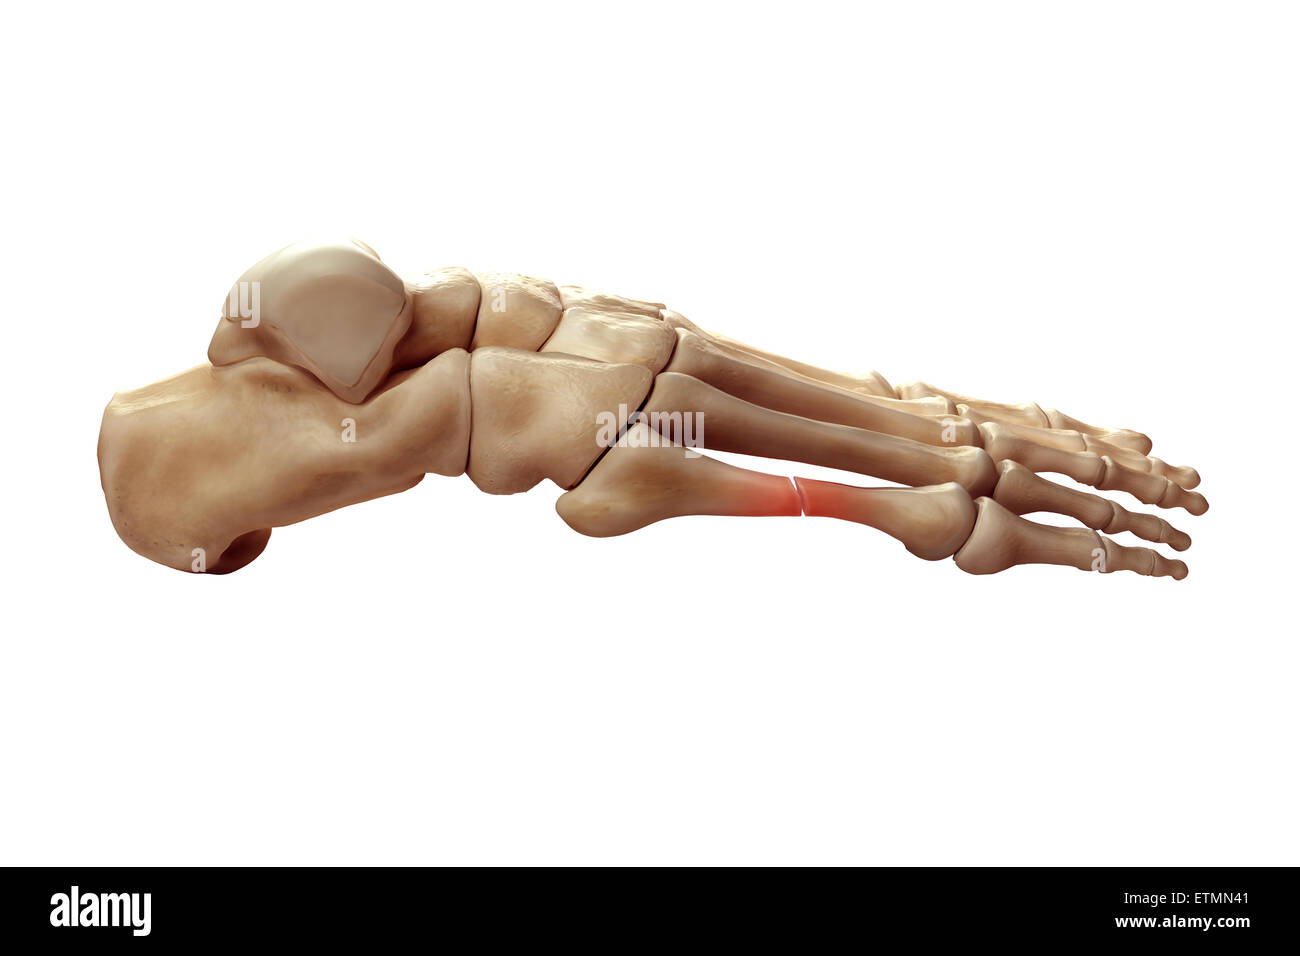 Illustration showing the bones of the foot with a break in a metatarsal highlighted. Stock Photo